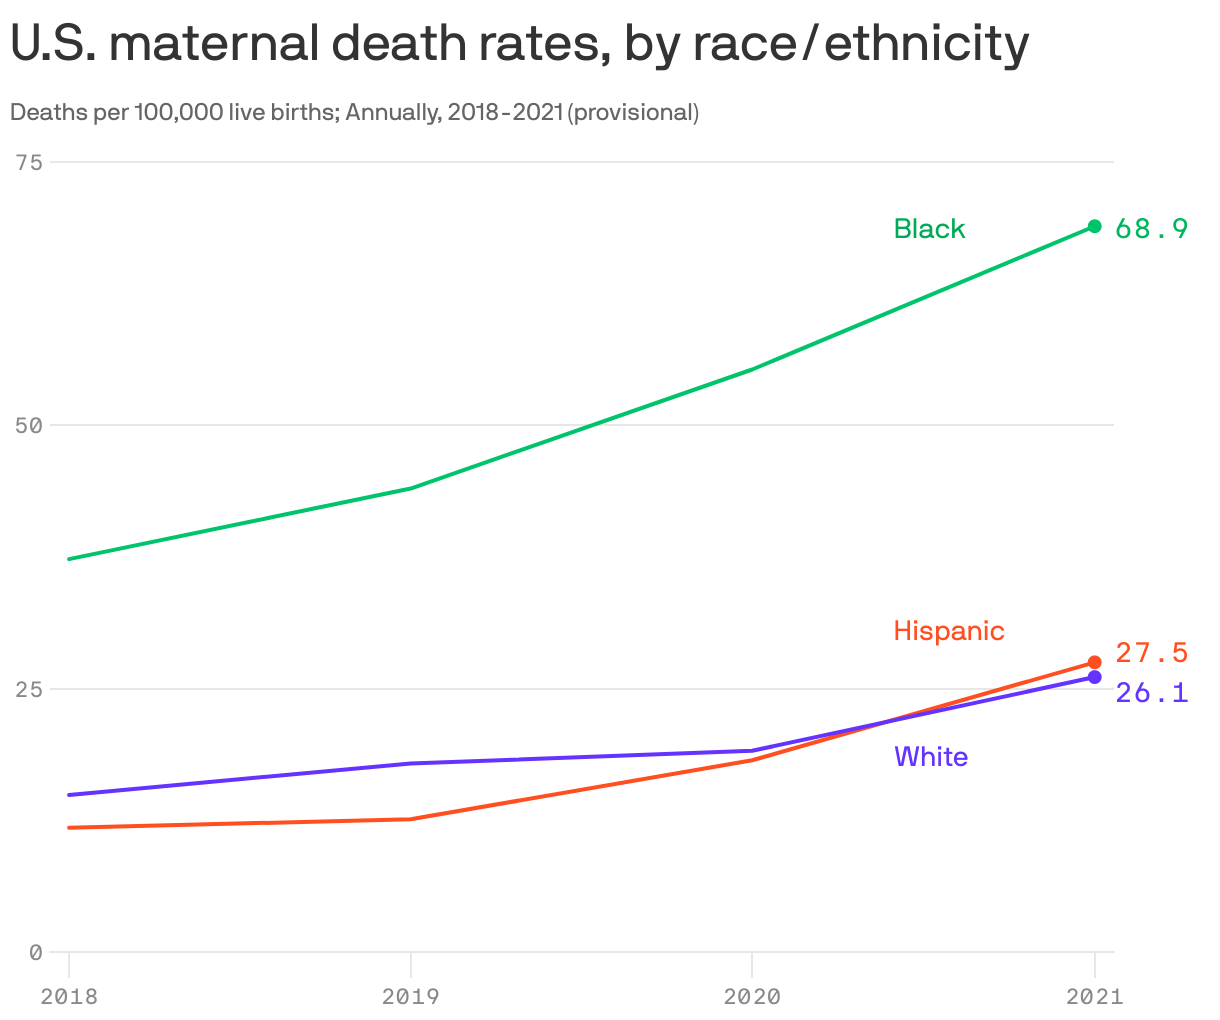 U.S. maternal death rates, by race/ethnicity